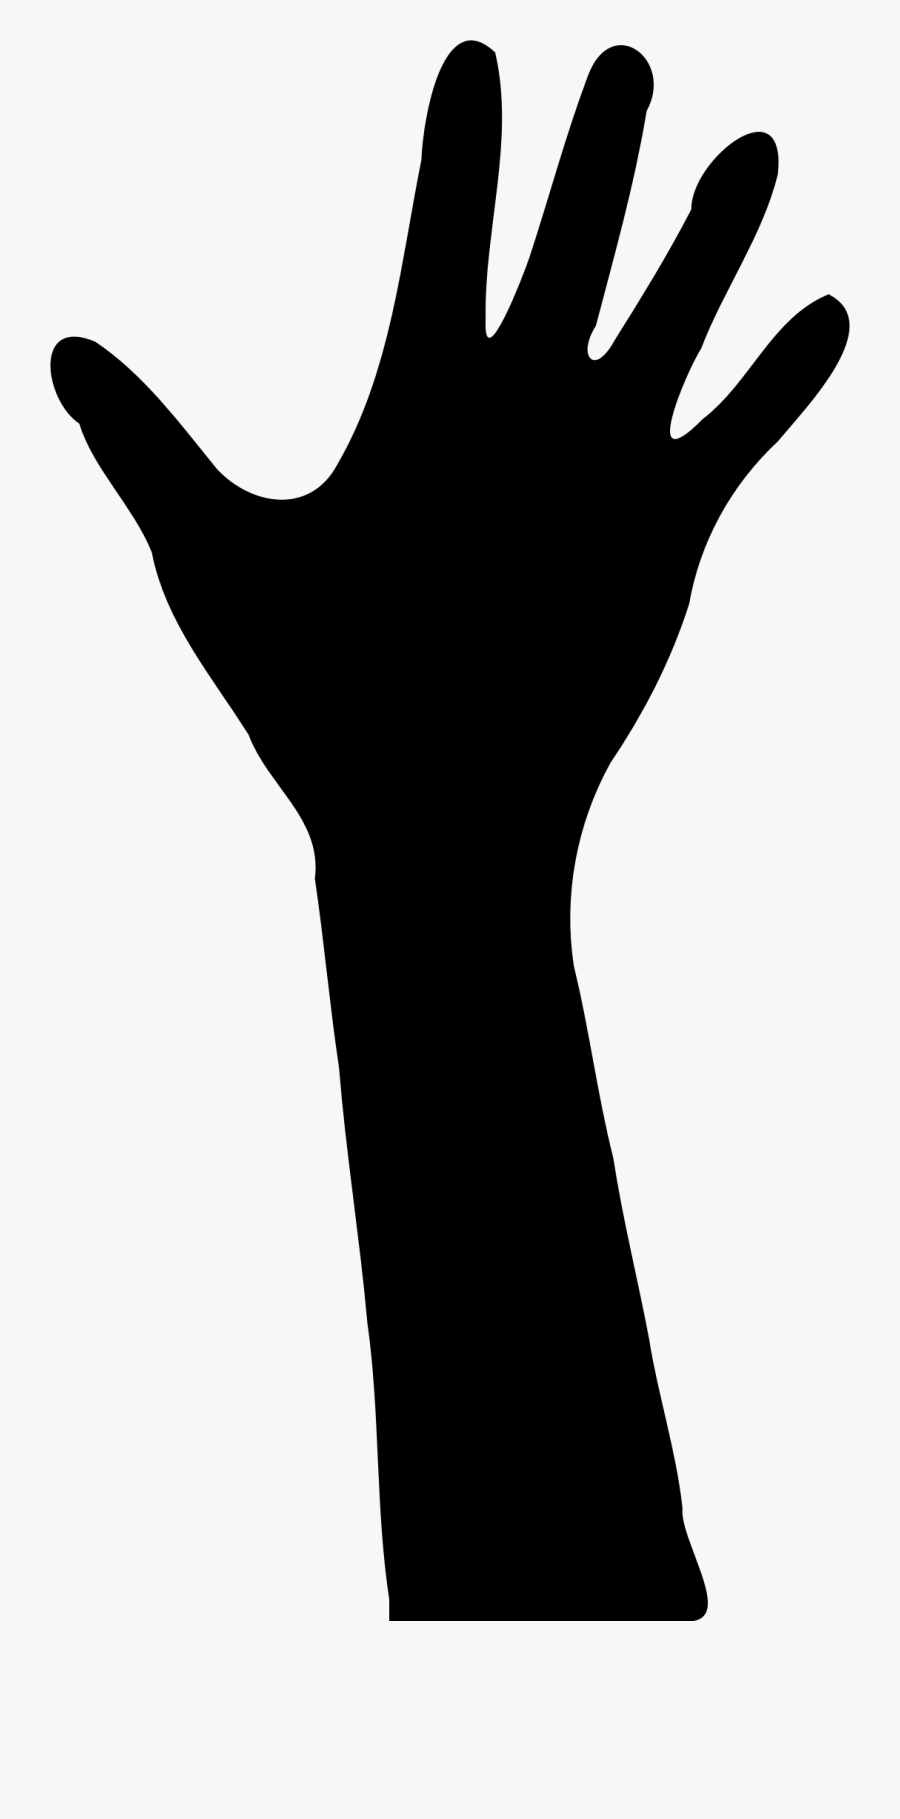 Cupped Hand Silhouette At Getdrawings - Hand Reaching Out Silhouette, Transparent Clipart